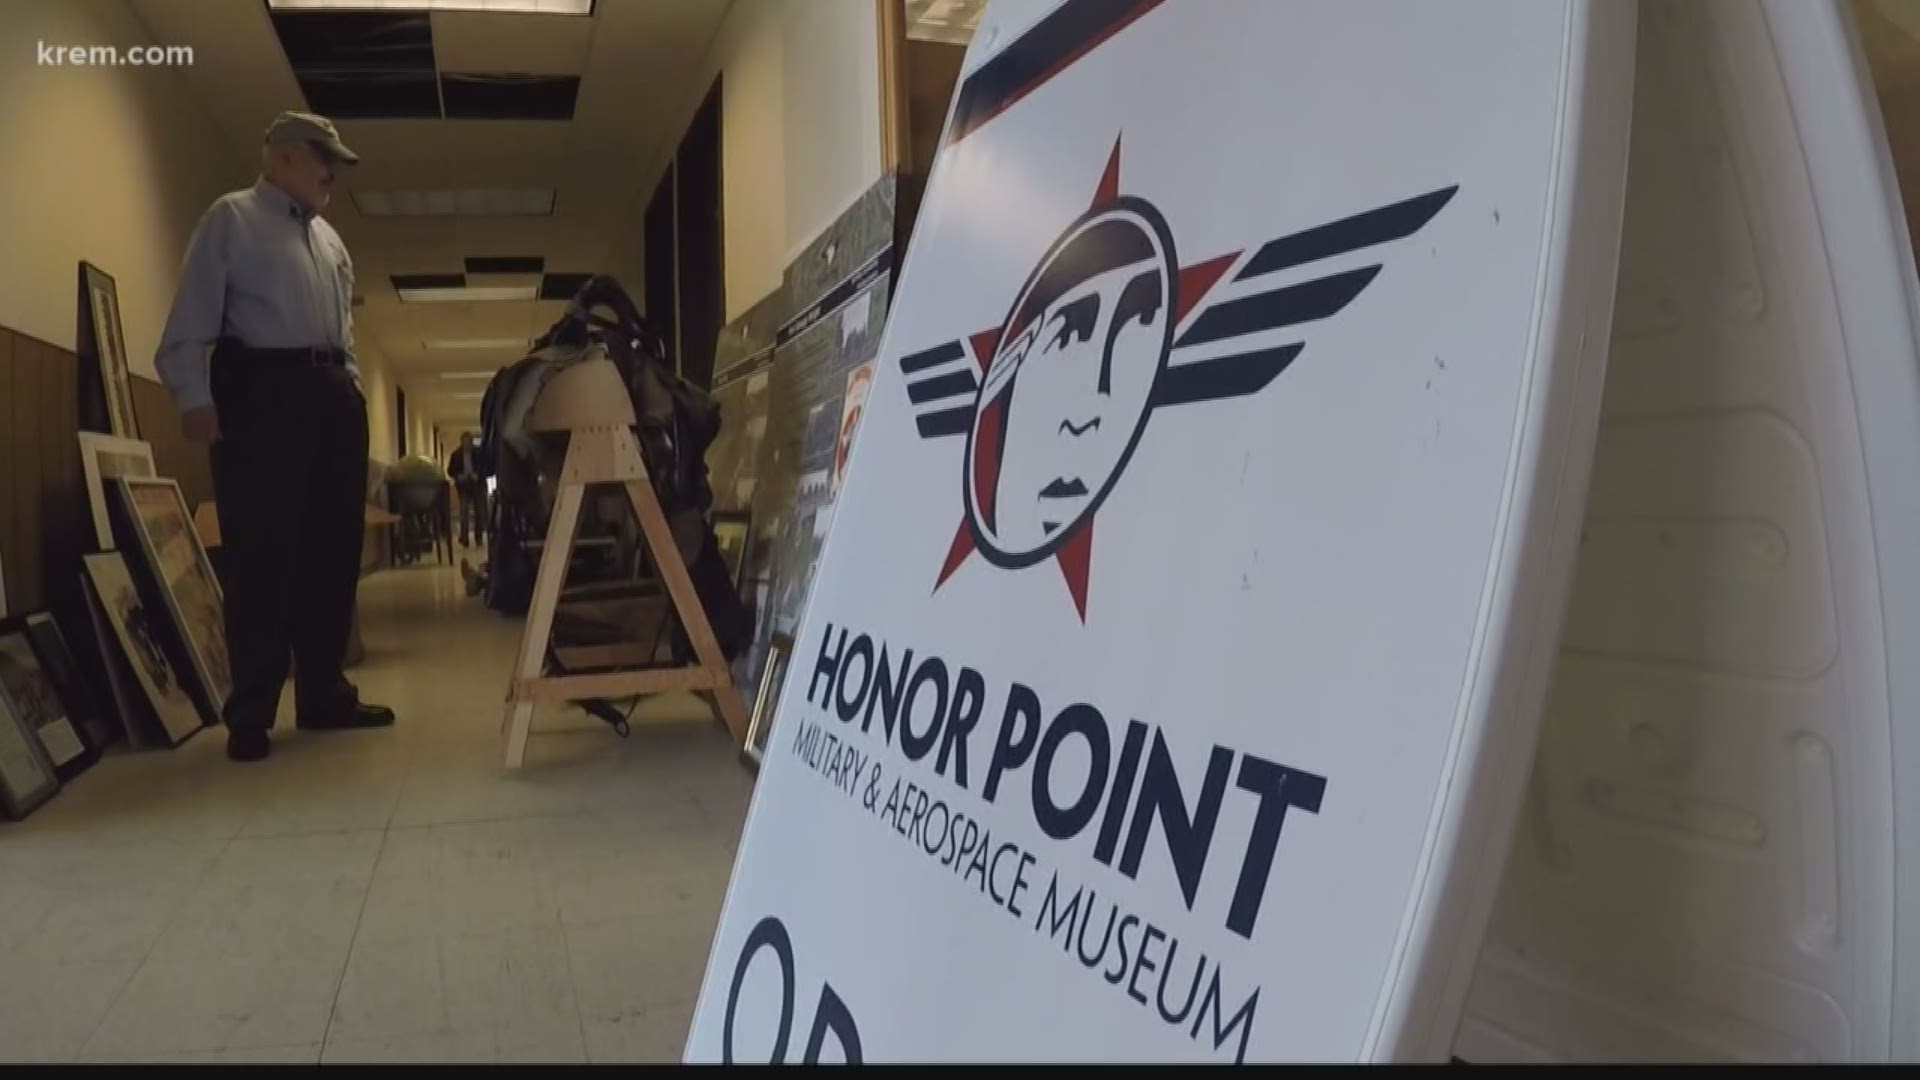 The Honor Point Museum has been collecting local military artifacts for decades. Now, they don't have a physical location to display their collection.